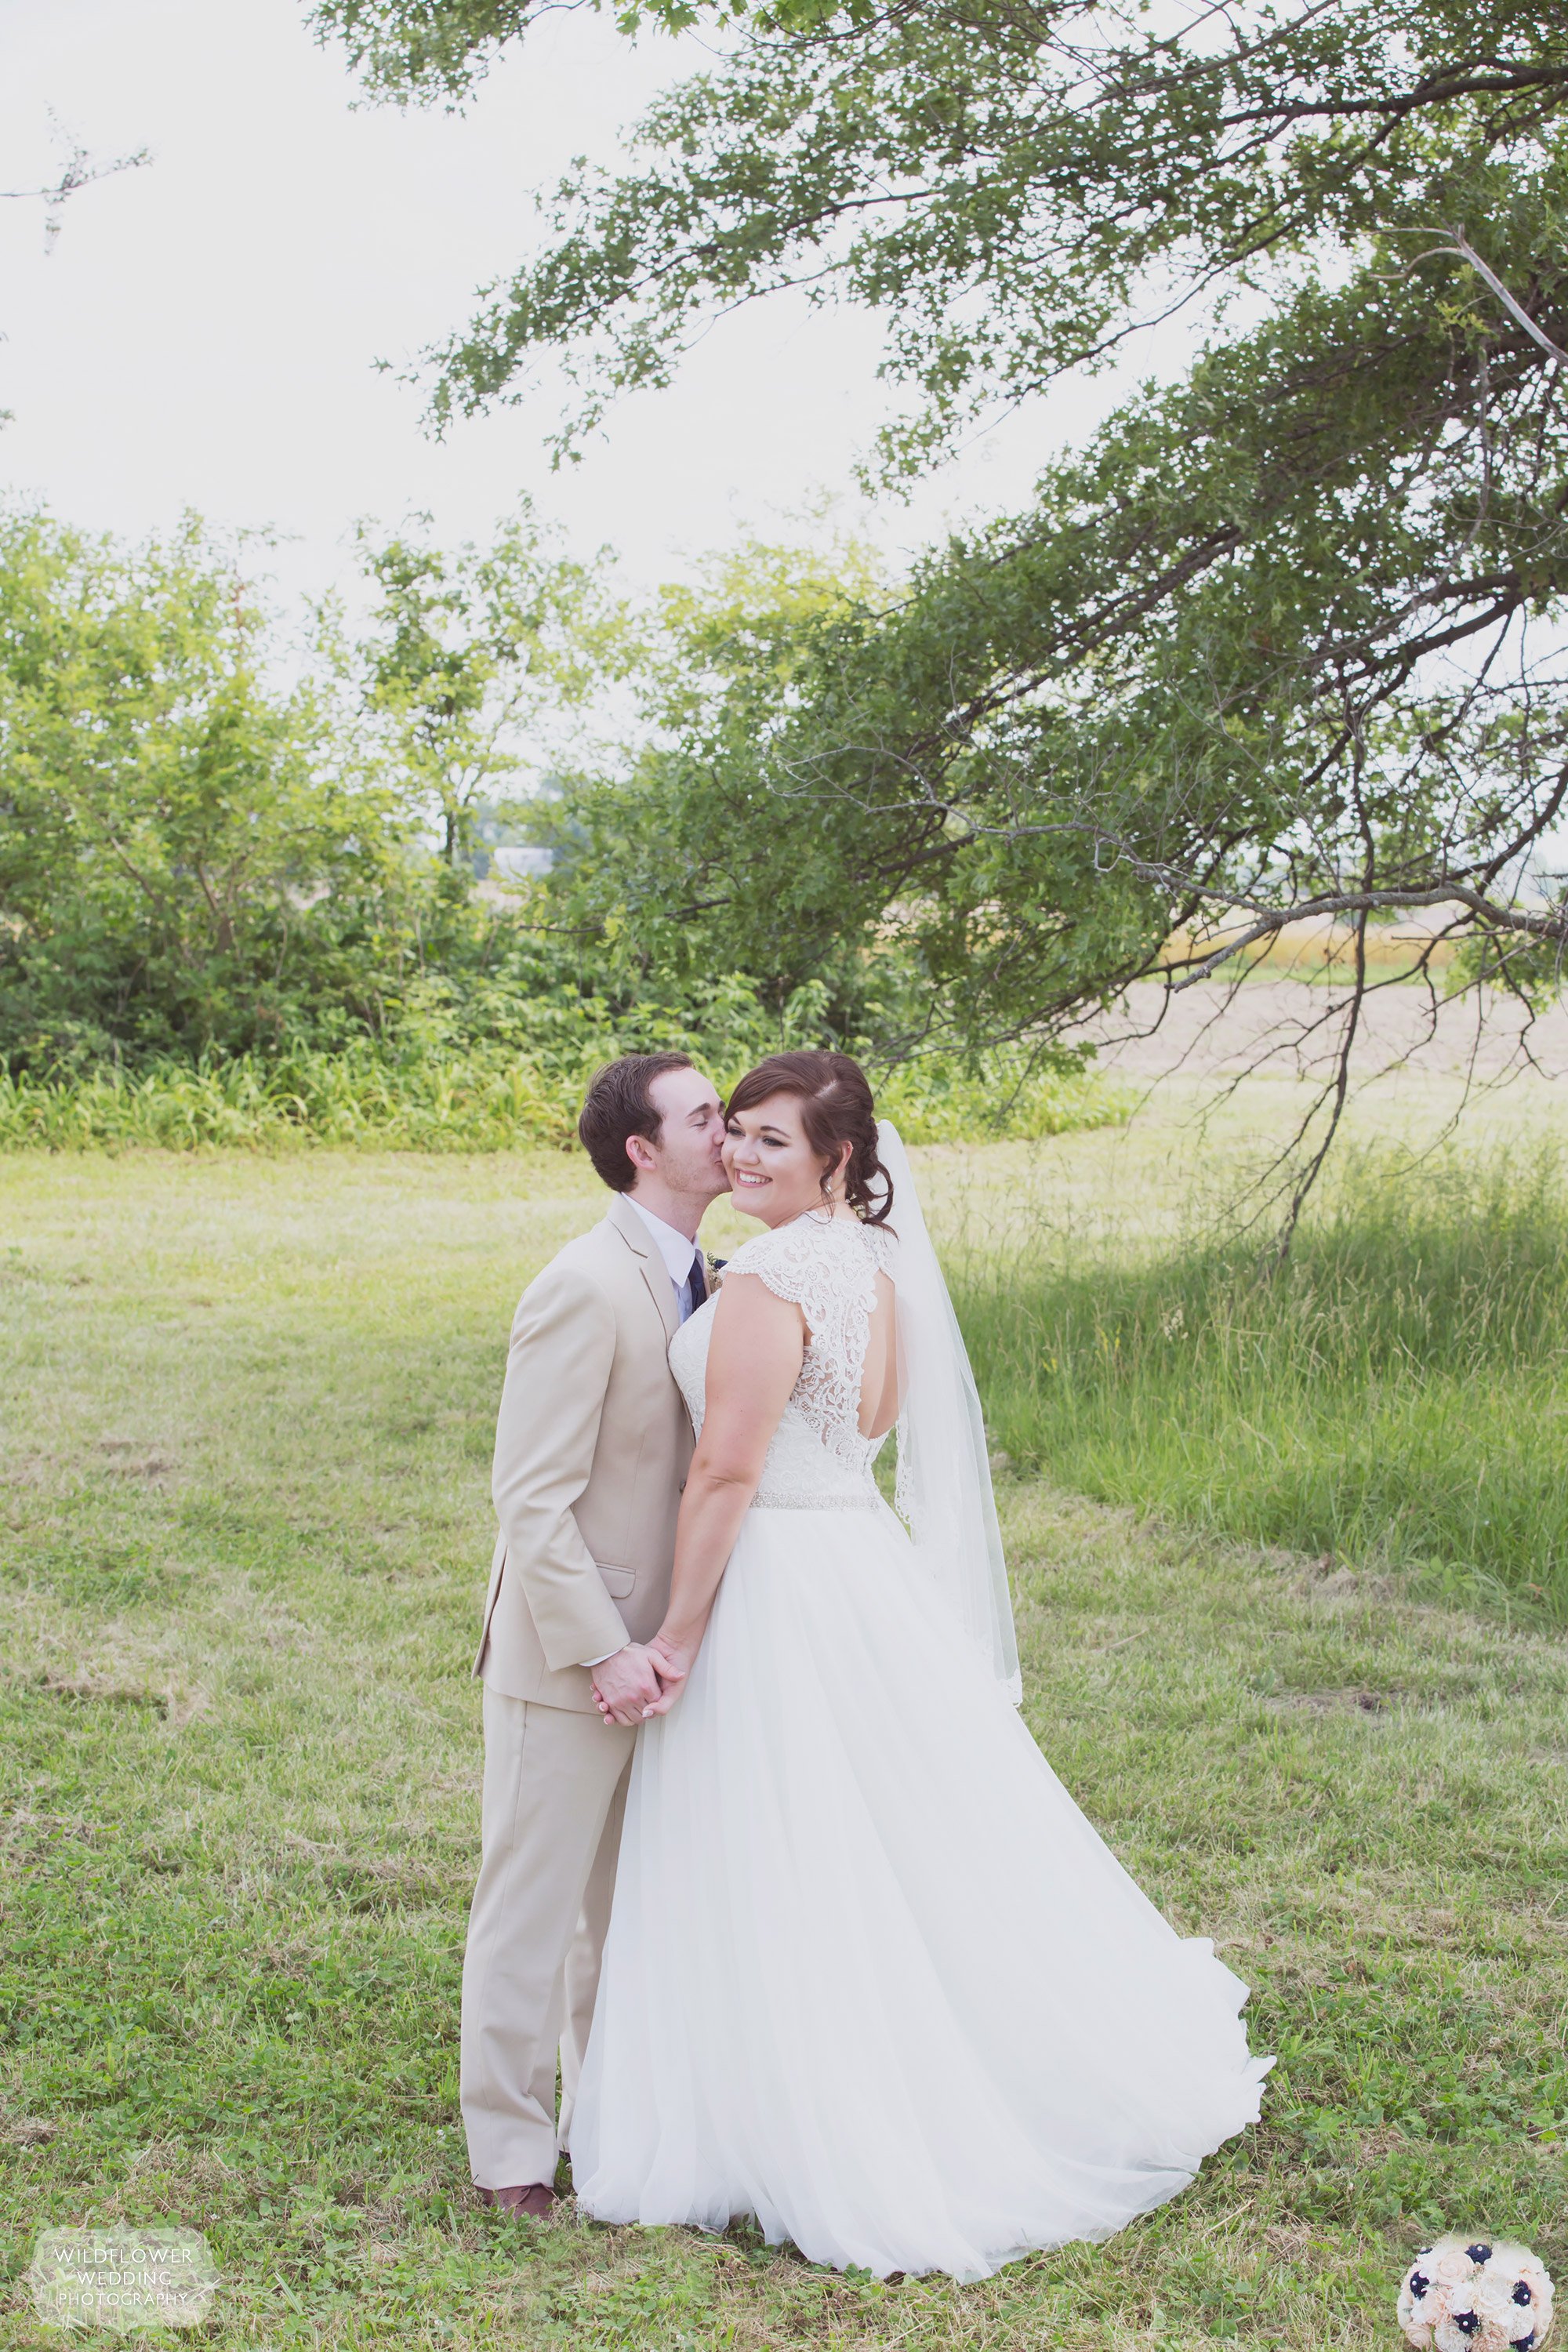 Portrait of the bride and groom with hanging trees at this country wedding at Bradford Farm.